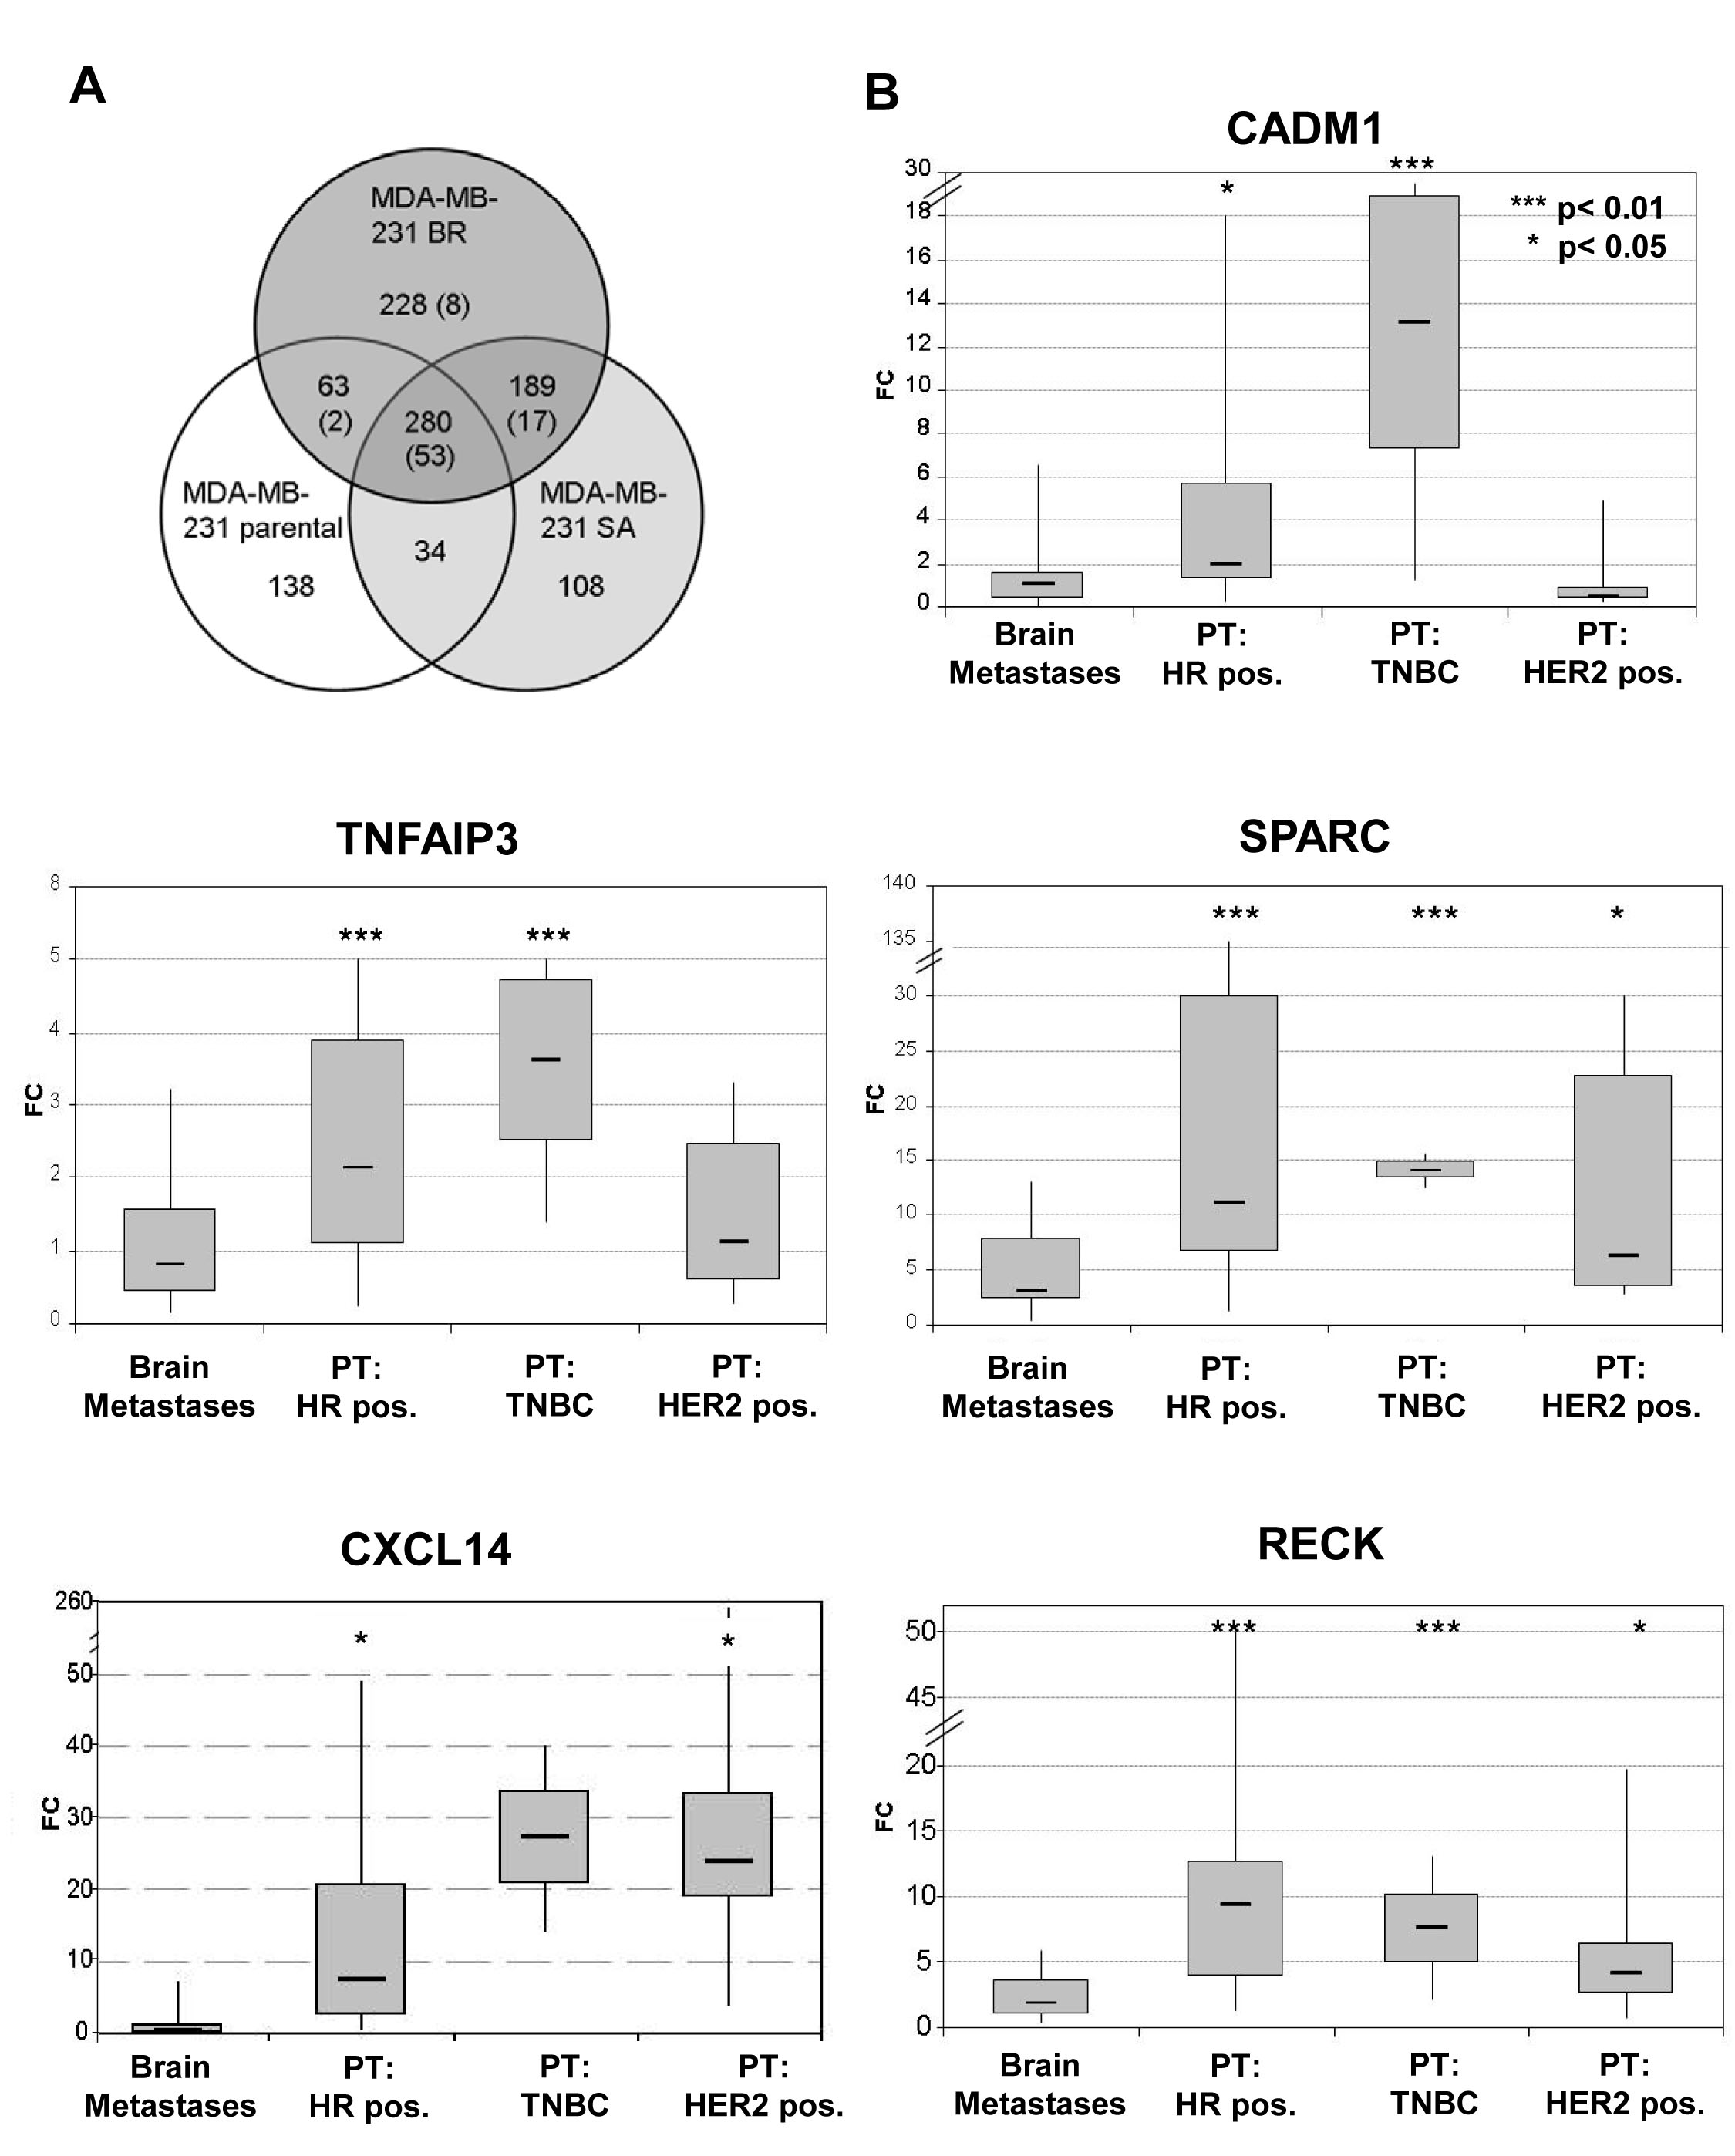 Figure 1:A) Gene expression changes in response to 5-Aza-2&#x2019;-deoxycytidine treatment in parental MDA-MB-231 breast cancer cell line and MDA-MB-231 BR and MDA-MB-231 SA variants.